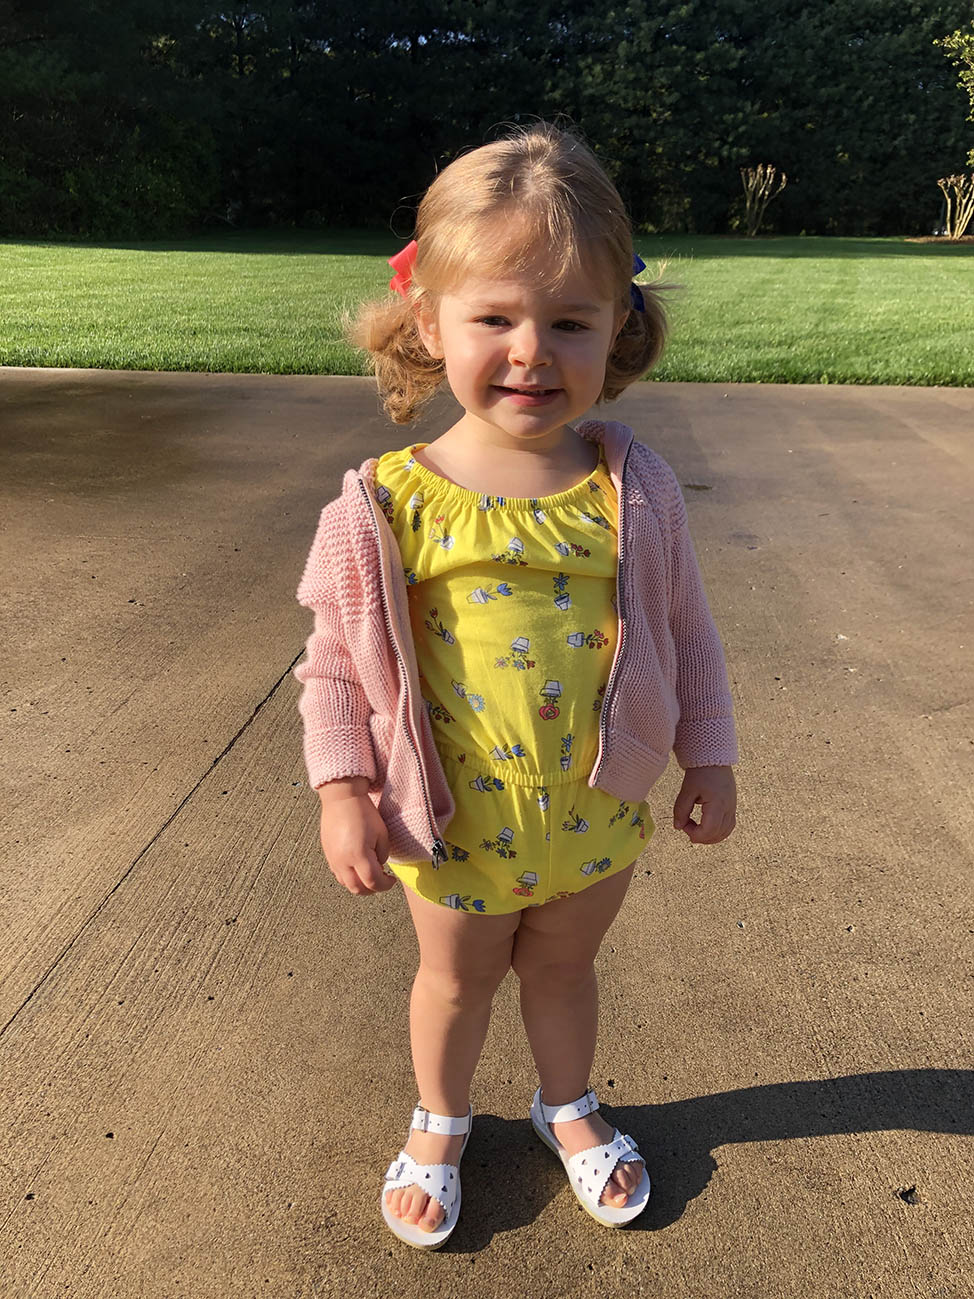 Charlotte Rose, two years old